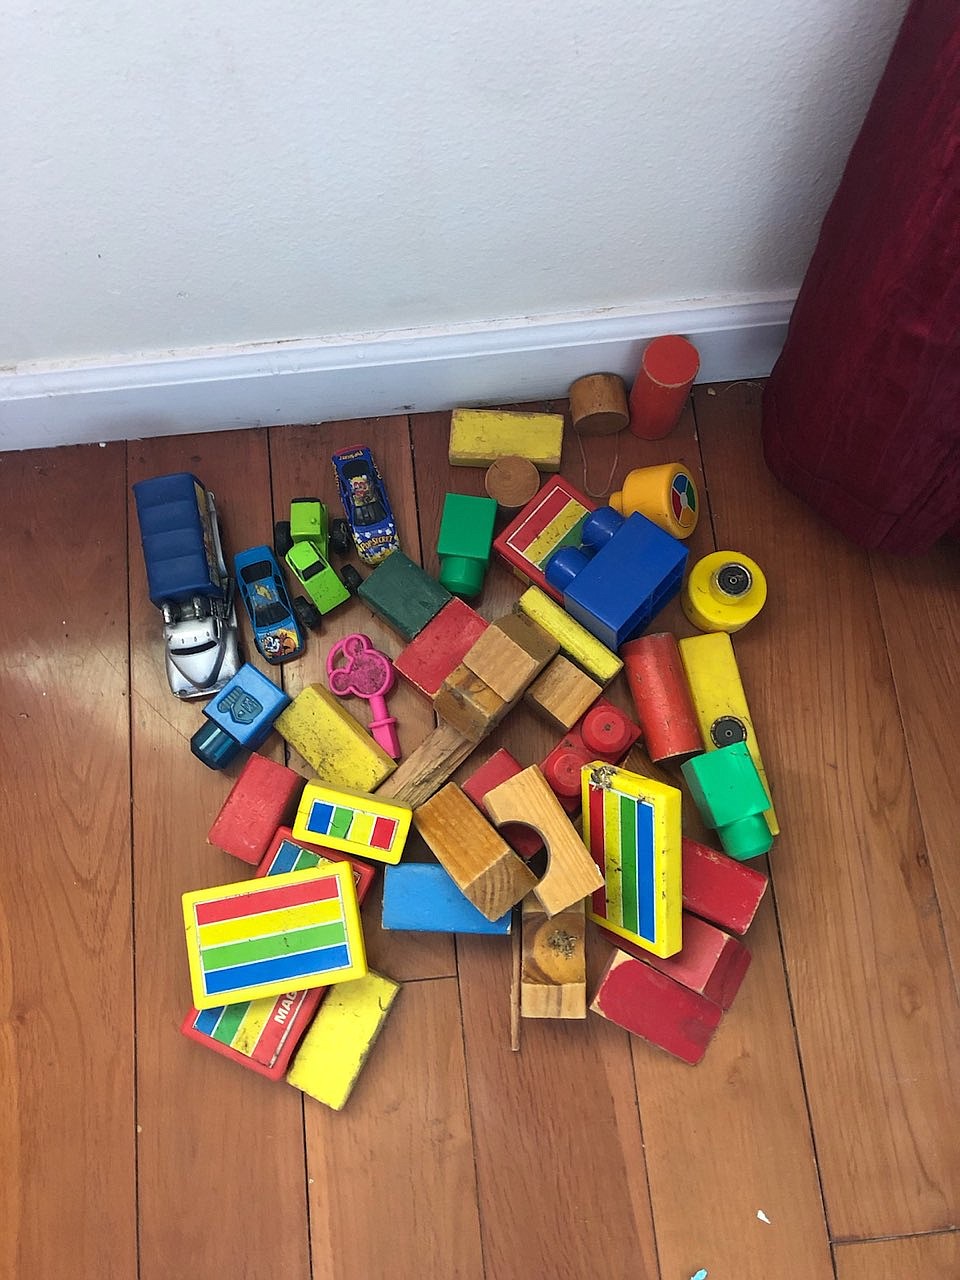 A collection of items Jacob Miller pulled out of a vent in a home, including toy cars and building blocks.